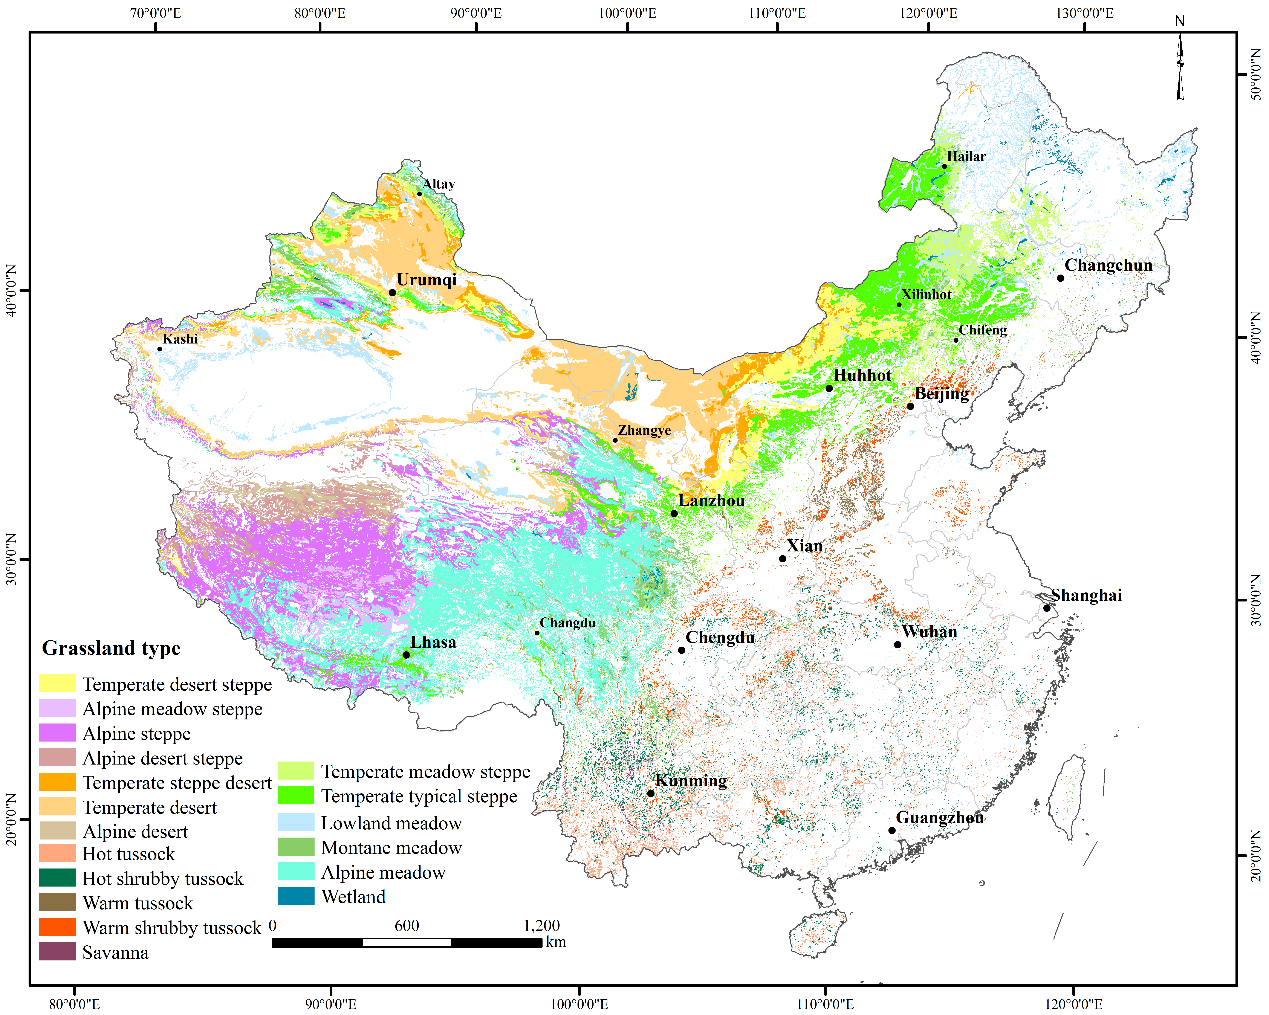 Map of Grassland Types in China